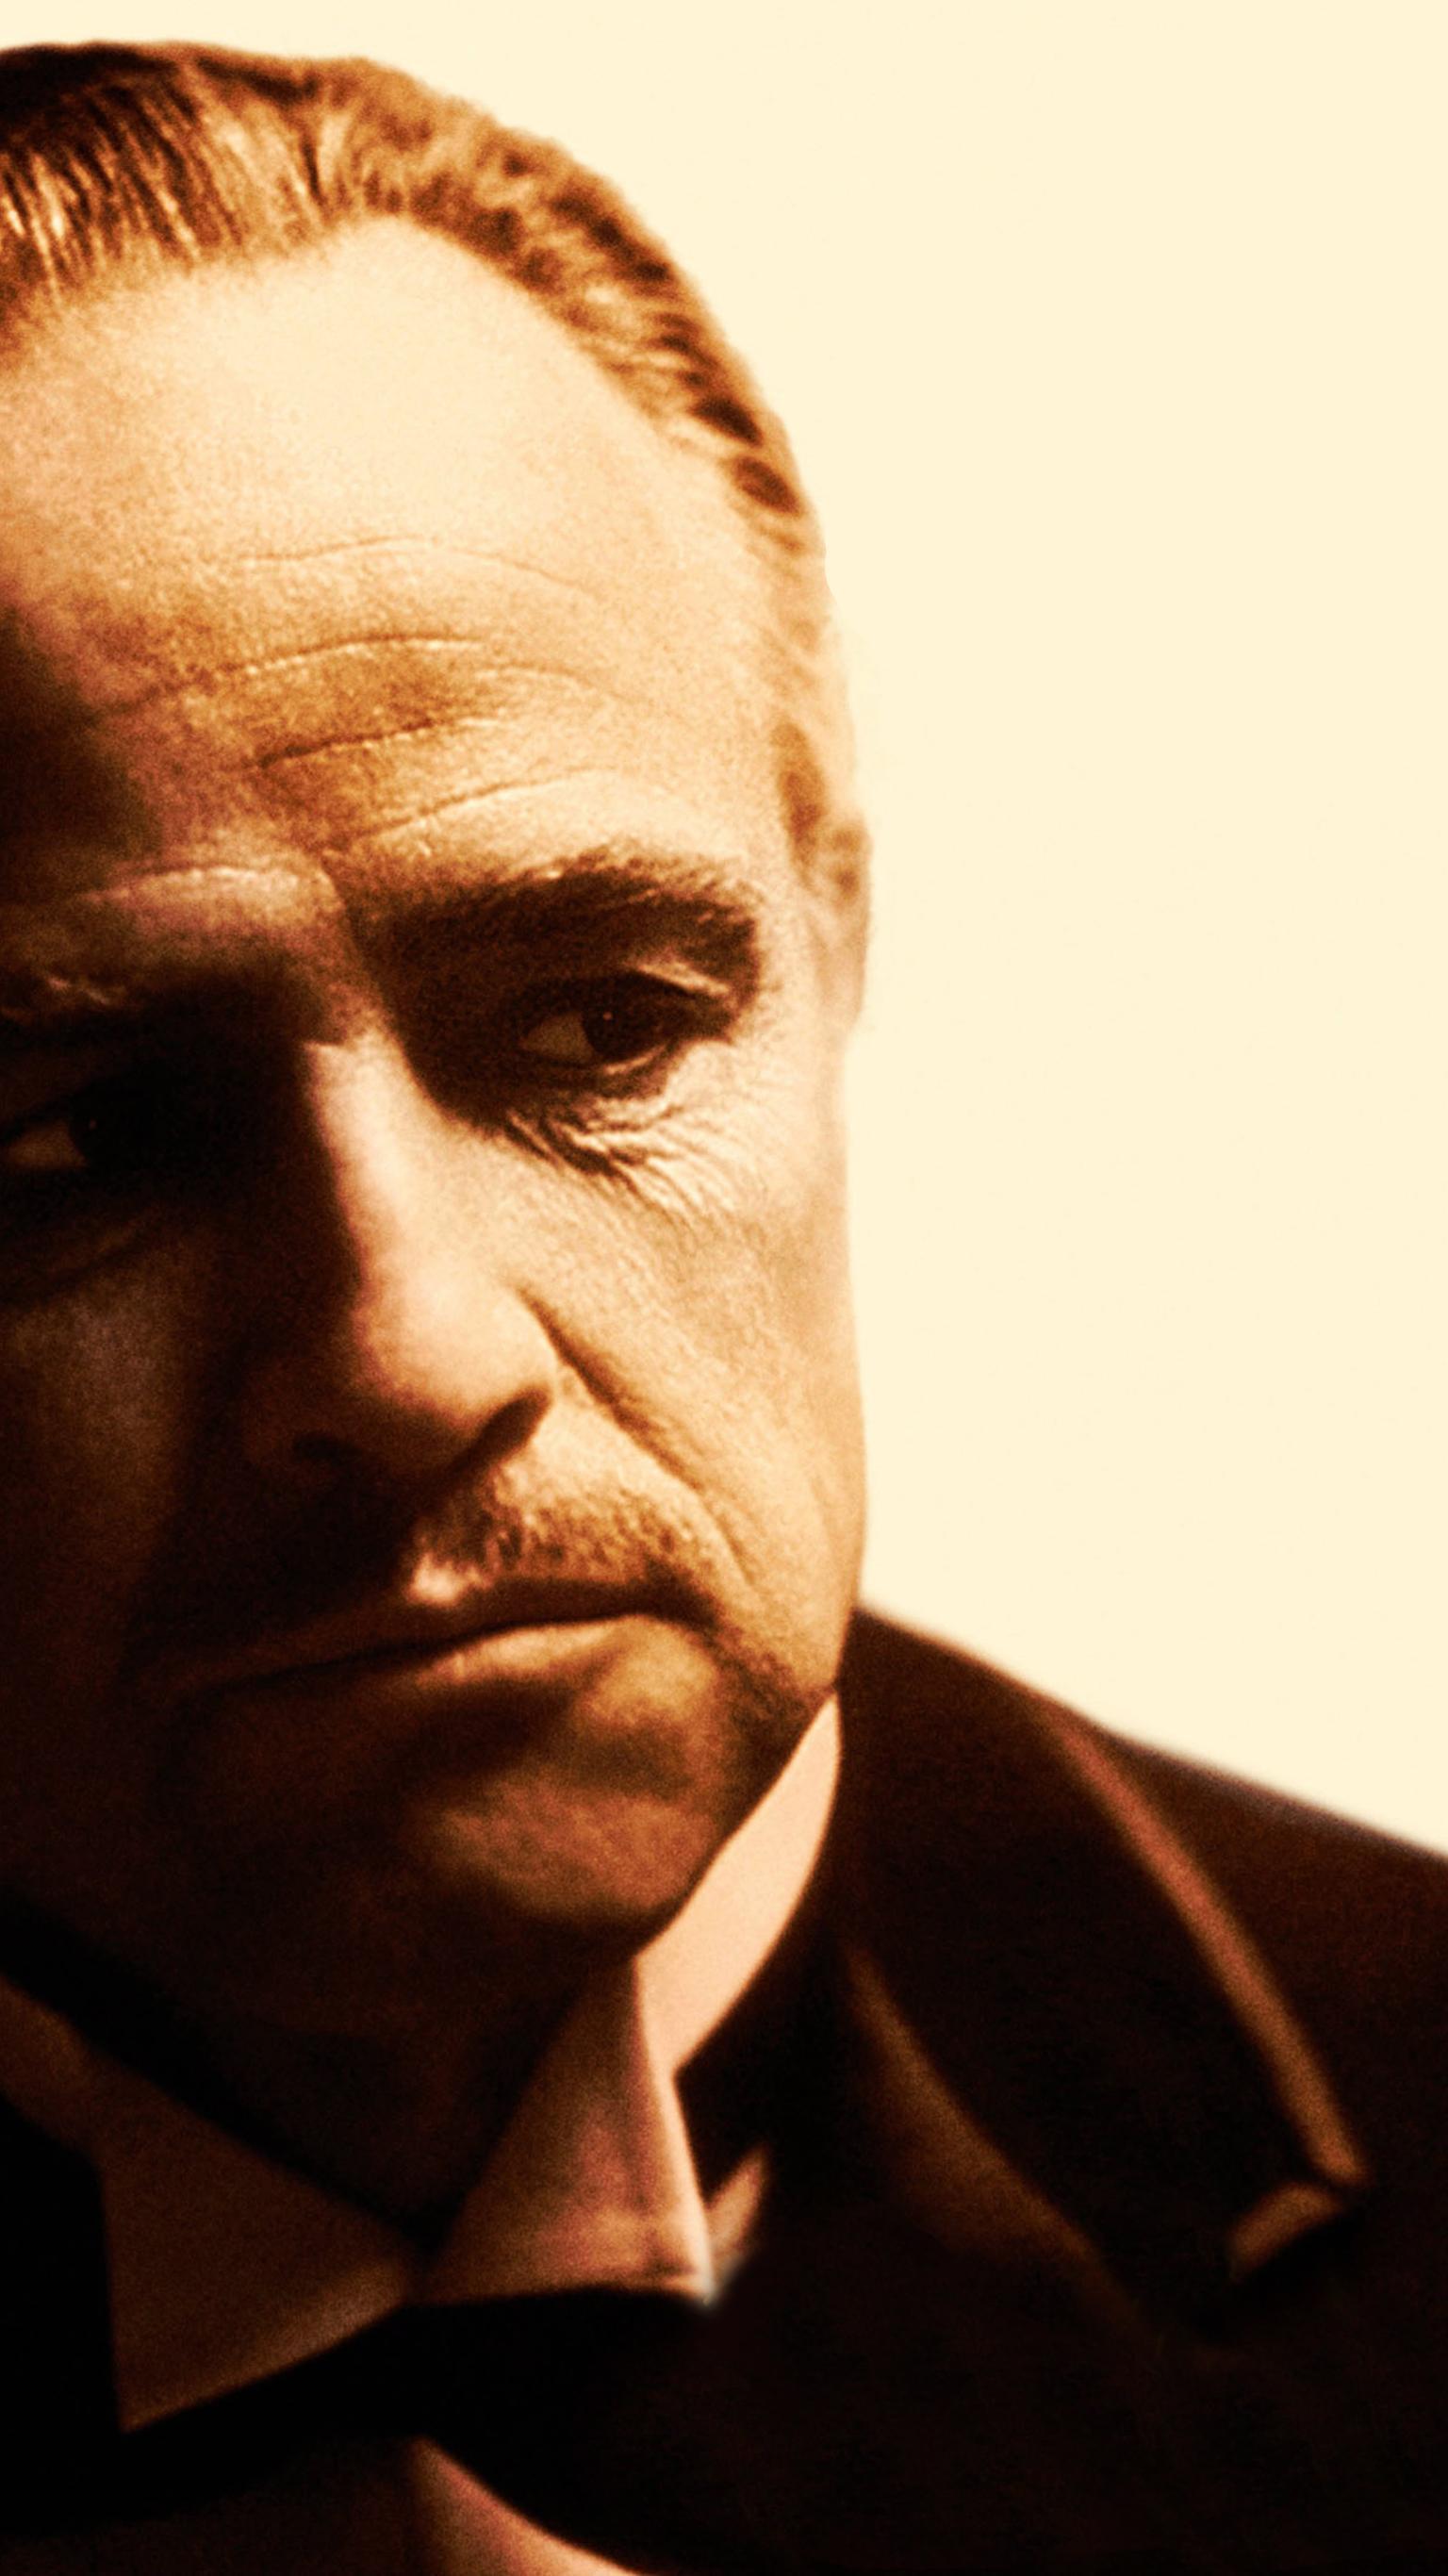 7 Best The Godfather HD 4K Wallpapers for iPhone or PC